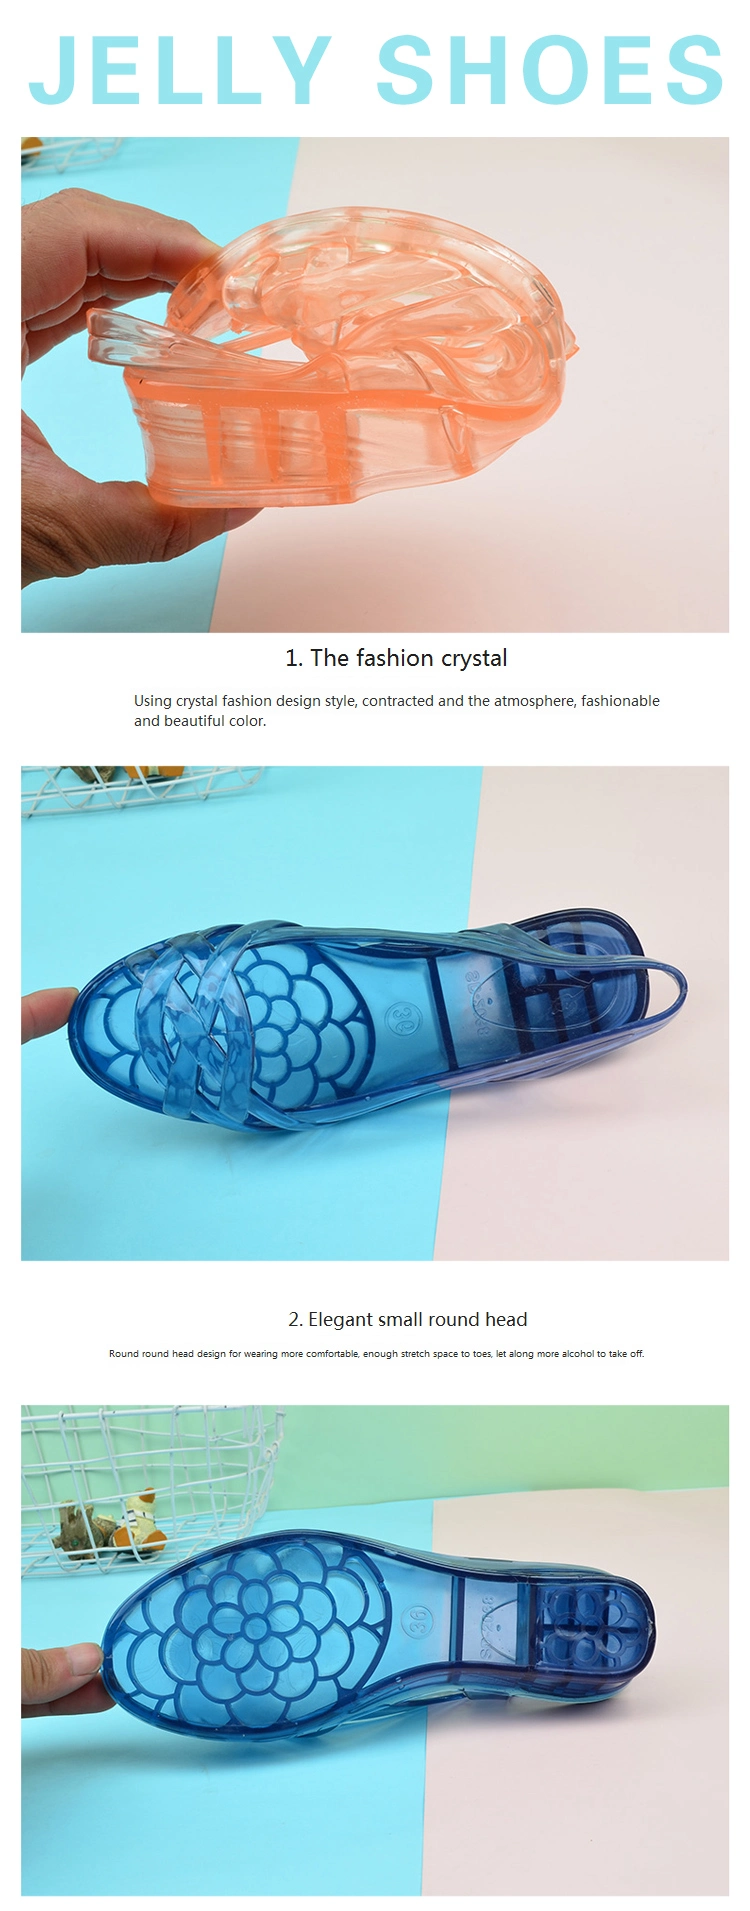 Top Quality PVC Summer Ladies Crystal Jelly Sandals Soft Non-Slip Beach Shoes Women